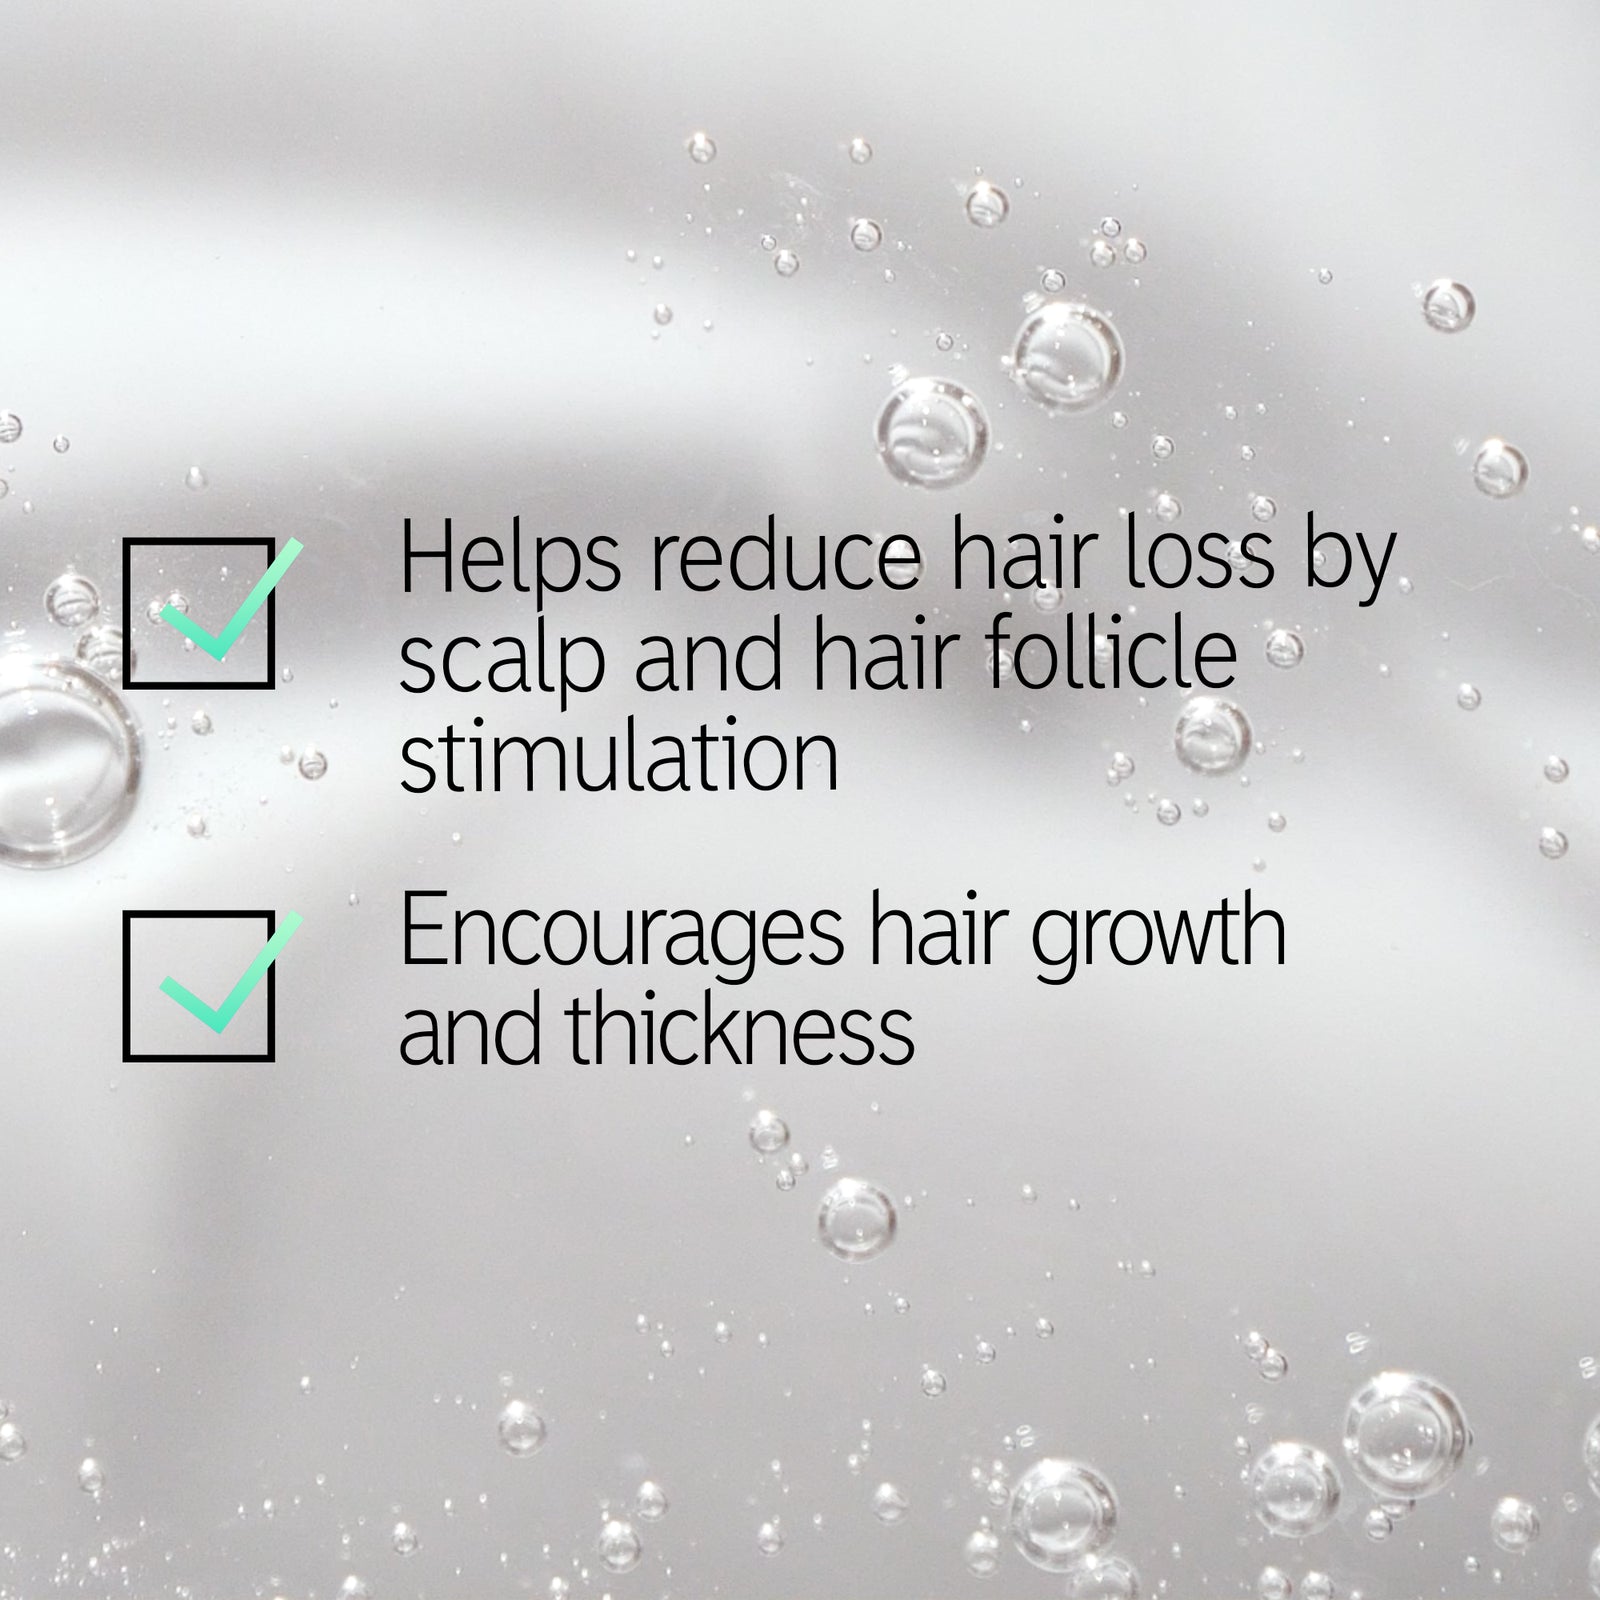 Checklist highlighting the benefits of using The Hair Growth Booster Bundle with text 'Helps reduce hair loss by scalp and hair follicle stimulation' and 'Encourages hair growth and thickness'